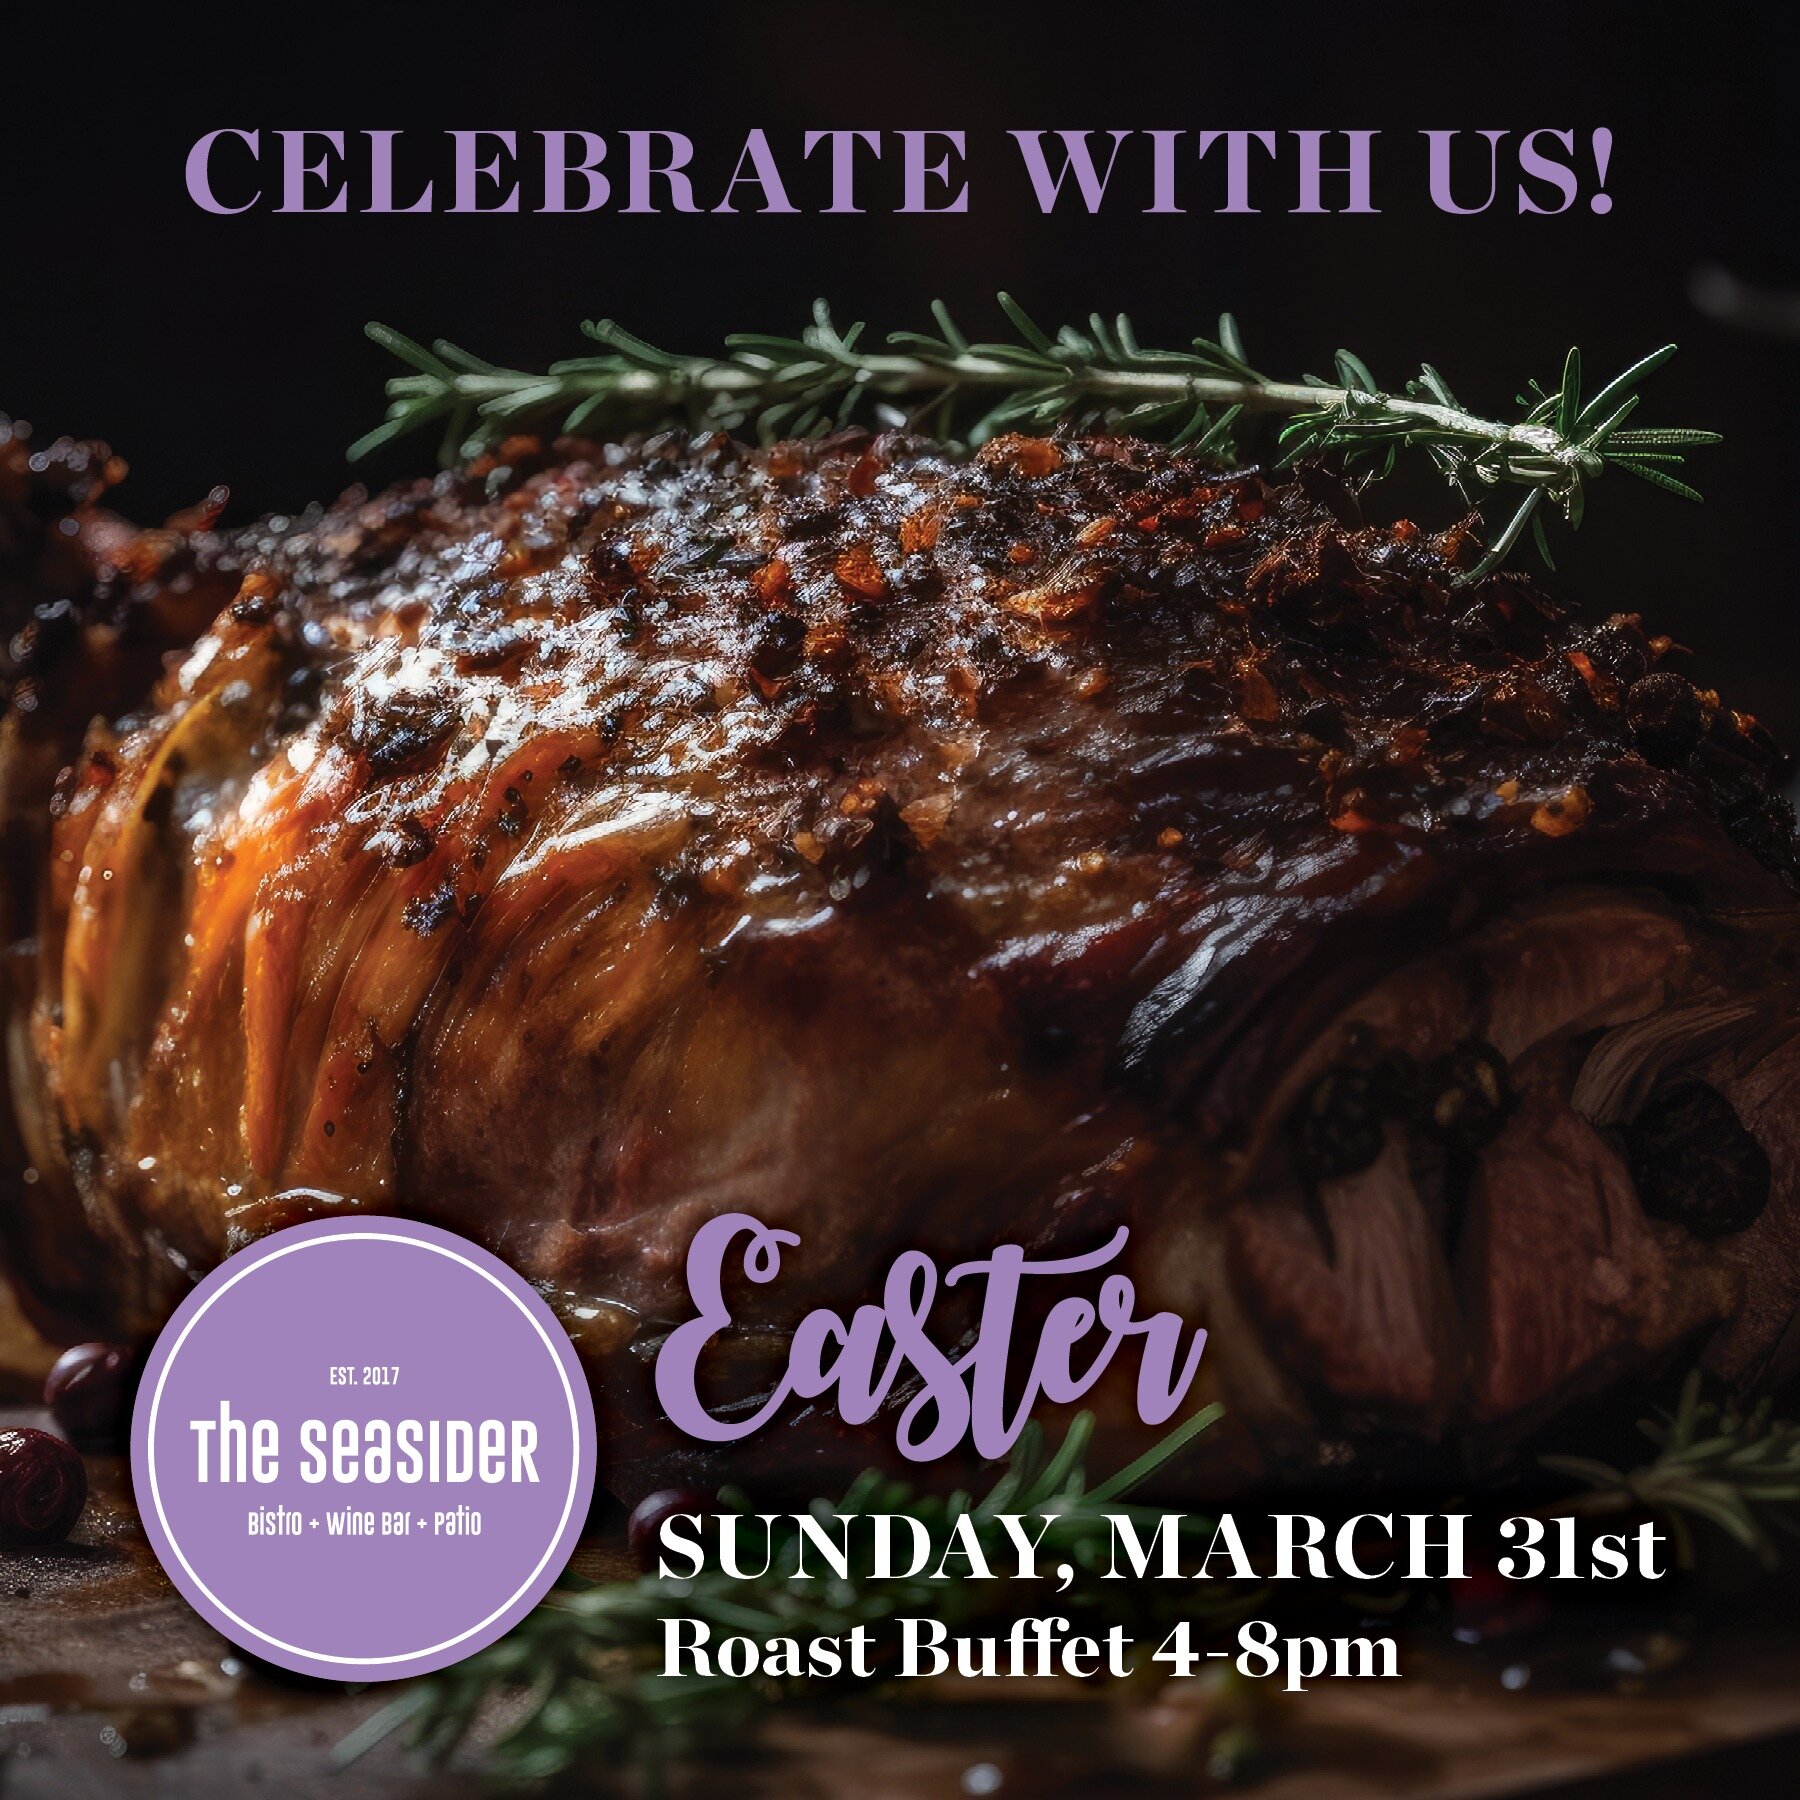 Celebrate Easter Weekend at the Seasider Bistro! We're open regular hours (4-9pm) on Good Friday as well as Saturday night with live music from local artist Andy Redhead from 5:30-8pm!

Plus, don't miss our special roast buffet on Easter Sunday! Our 